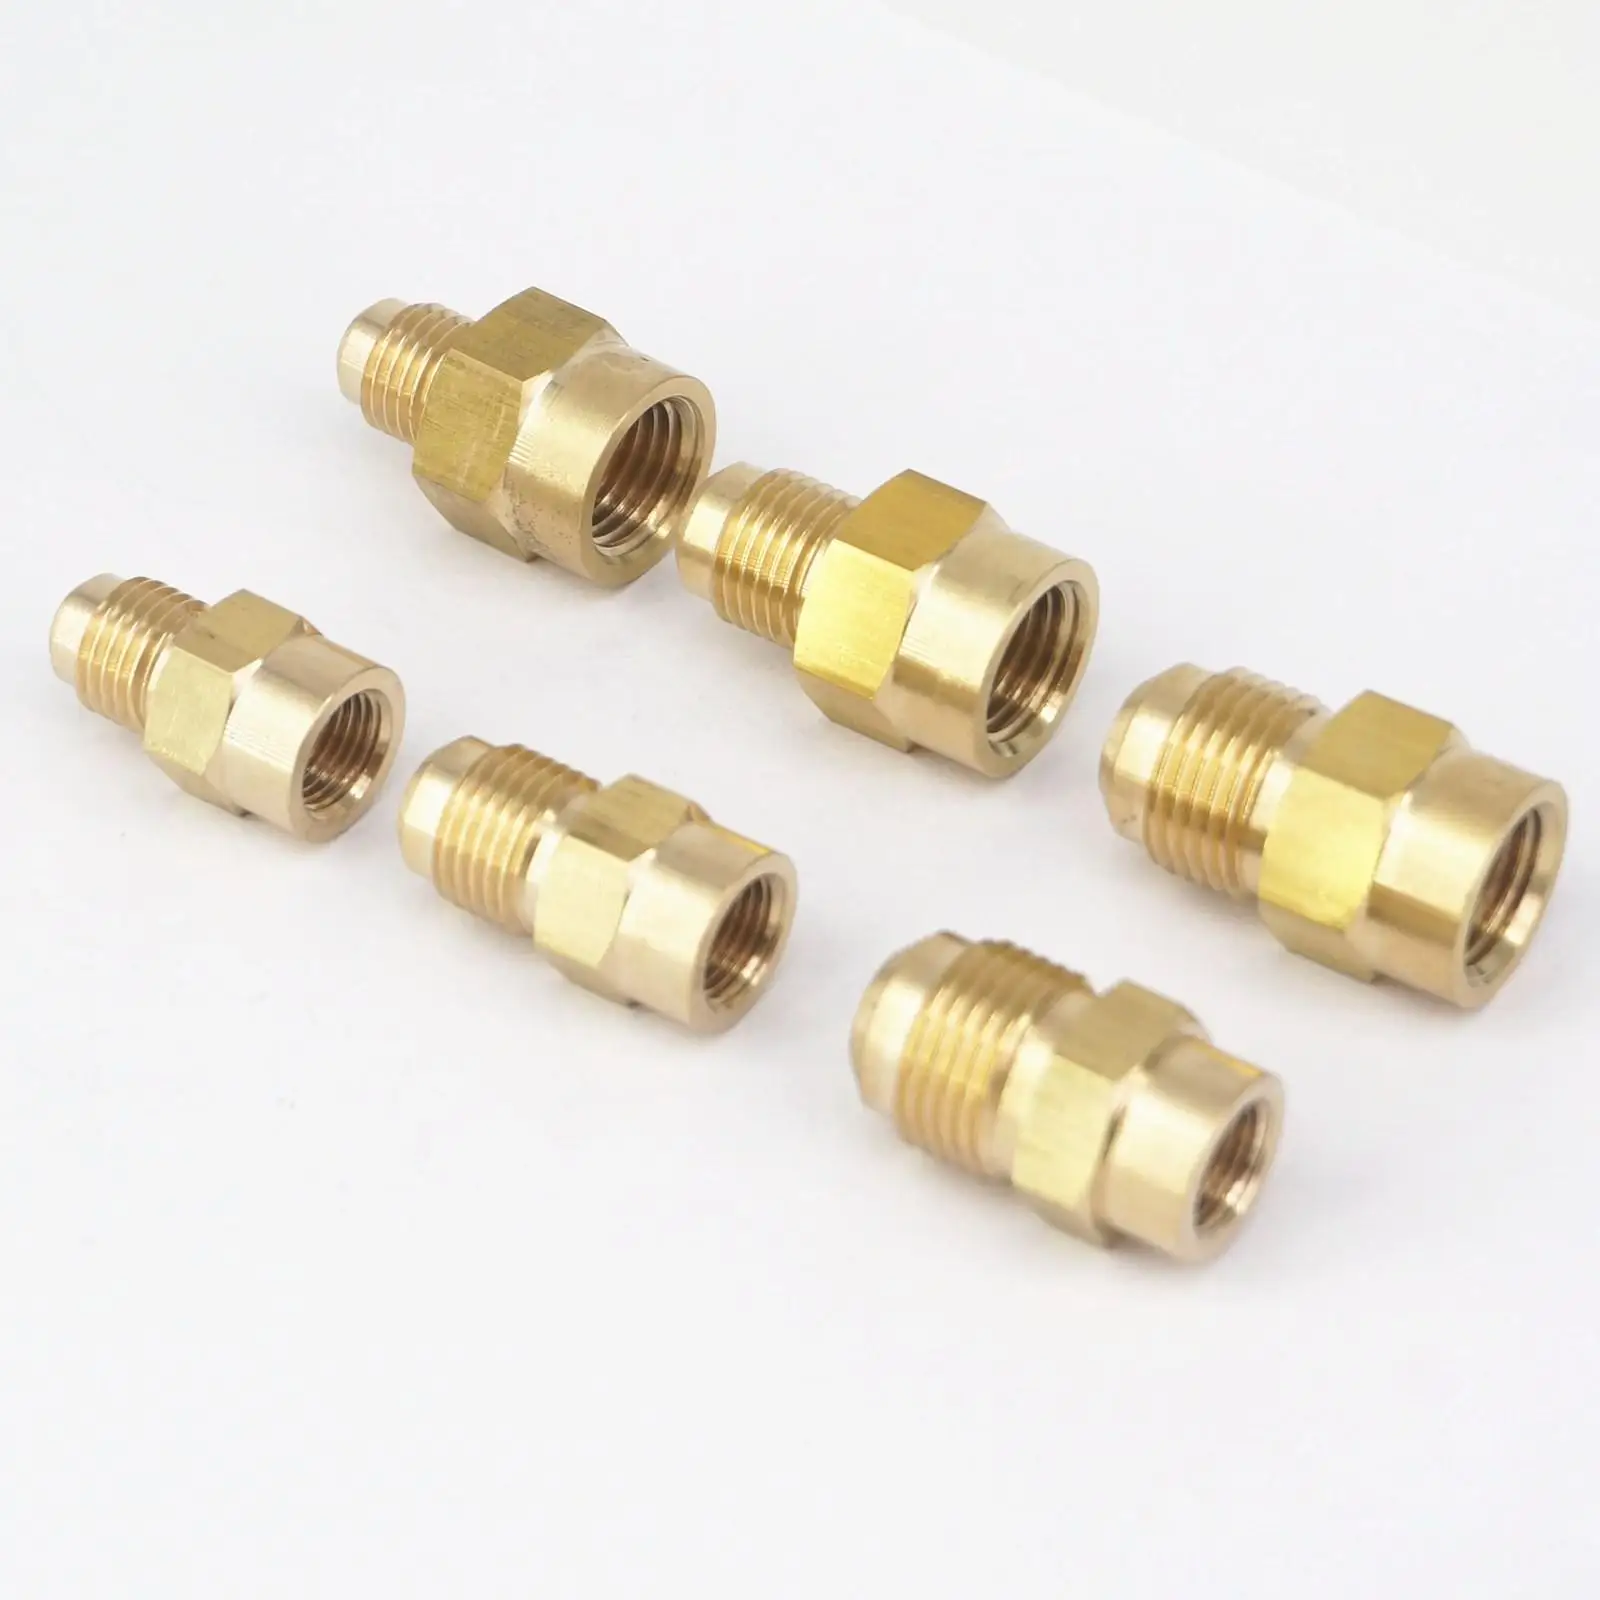 HHTC Fit Tube OD 1/4 5/16 3/8-1/8 1/4 NPT Female Brass SAE 45 Degree Pipe Fittings Adapters 229PSI Thread Specification : Type 4 